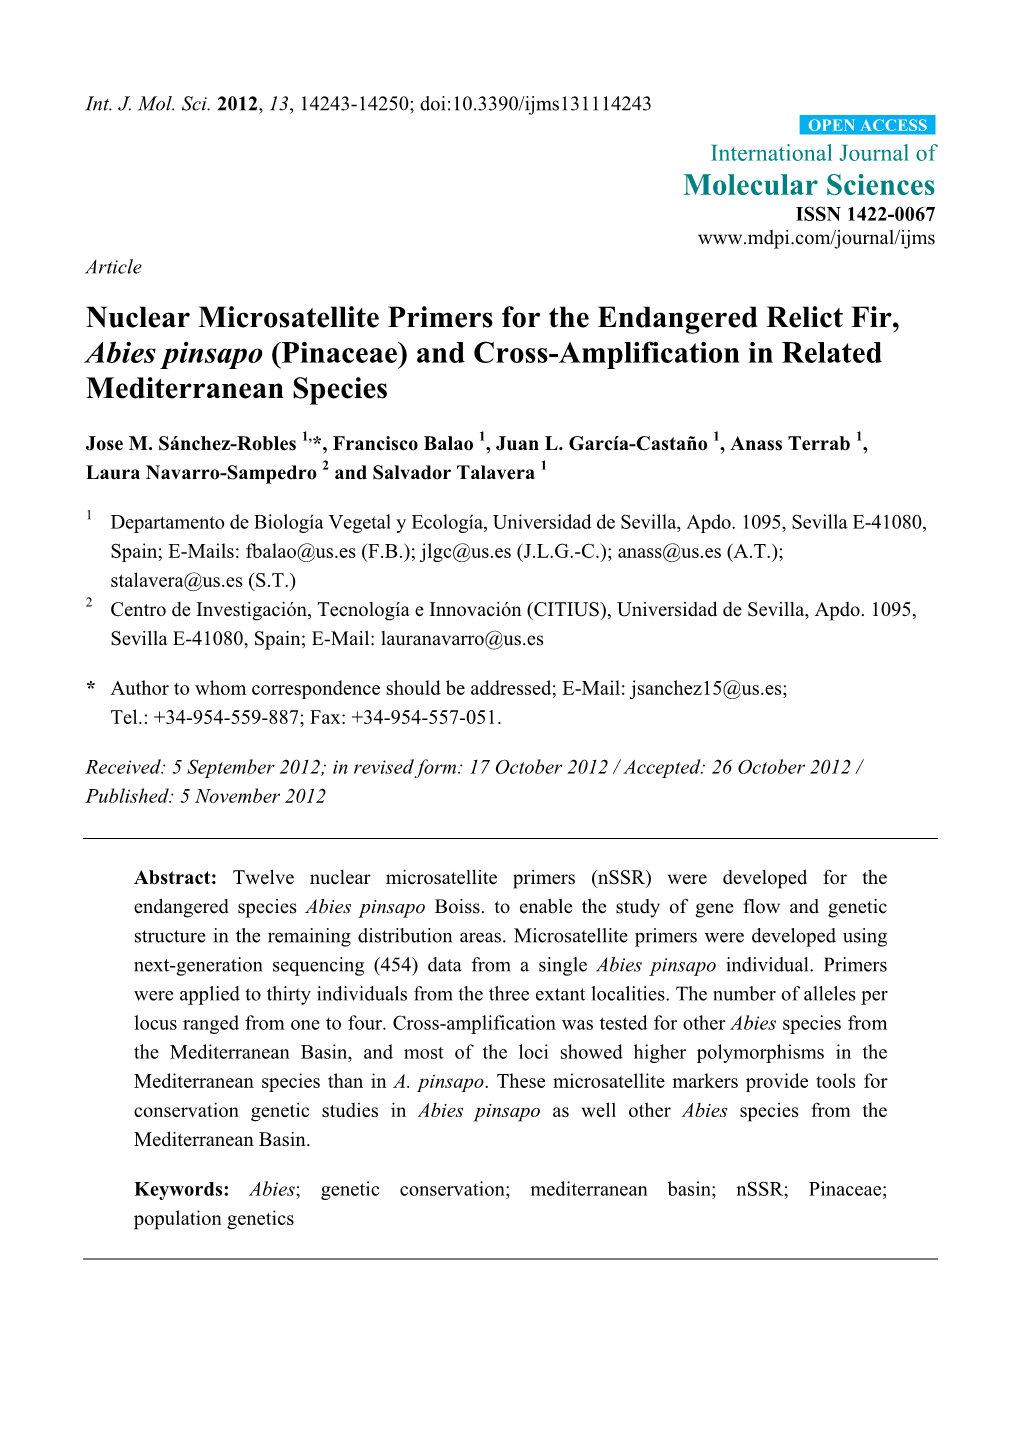 Nuclear Microsatellite Primers for the Endangered Relict Fir, Abies Pinsapo (Pinaceae) and Cross-Amplification in Related Mediterranean Species